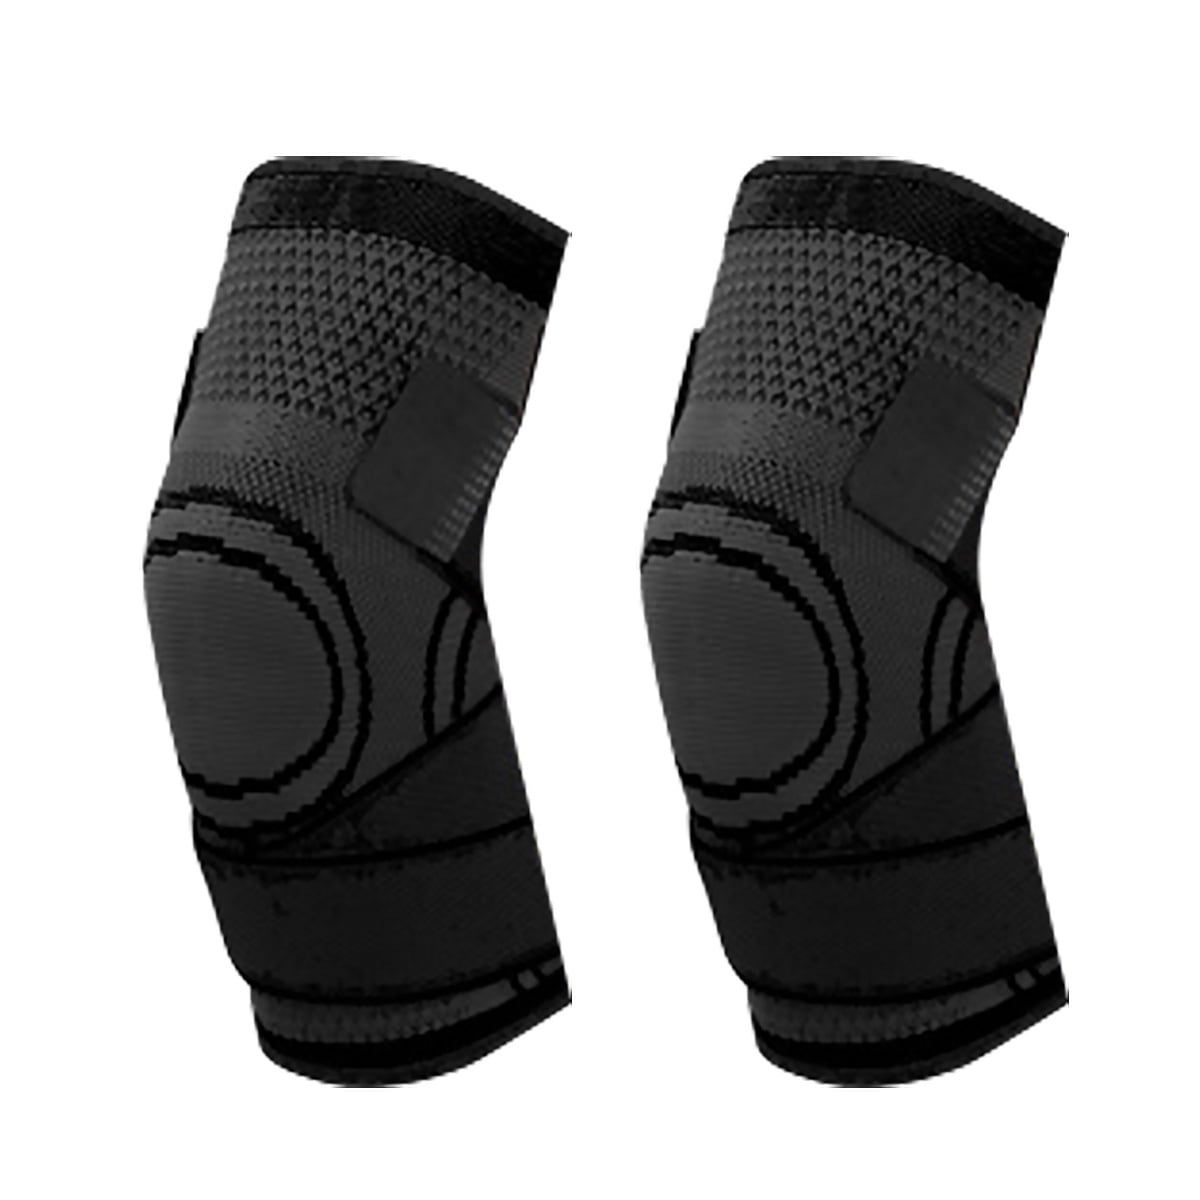 Knee Brace Compression Sleeve with Strap for Best Support & Pain Relief for Meniscus  Tear,Arthritis,Running,Basketball,MCL,Crossfit,Jogging and Post Surgery  Recovery for Men Women 